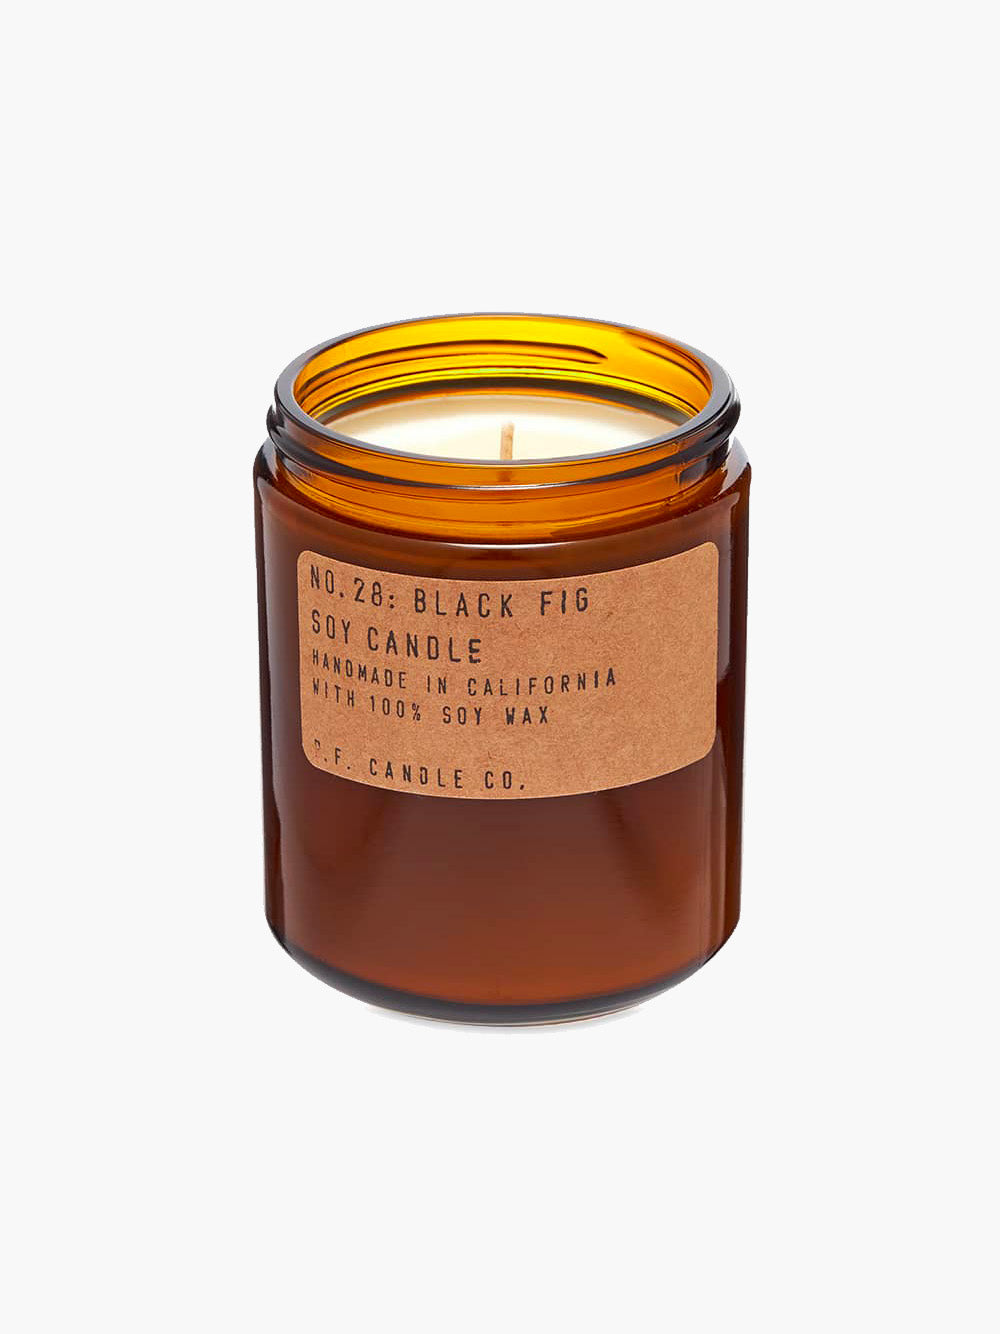 P.F. Candle Co. 204g Soy Candle - No.26 Black Fig